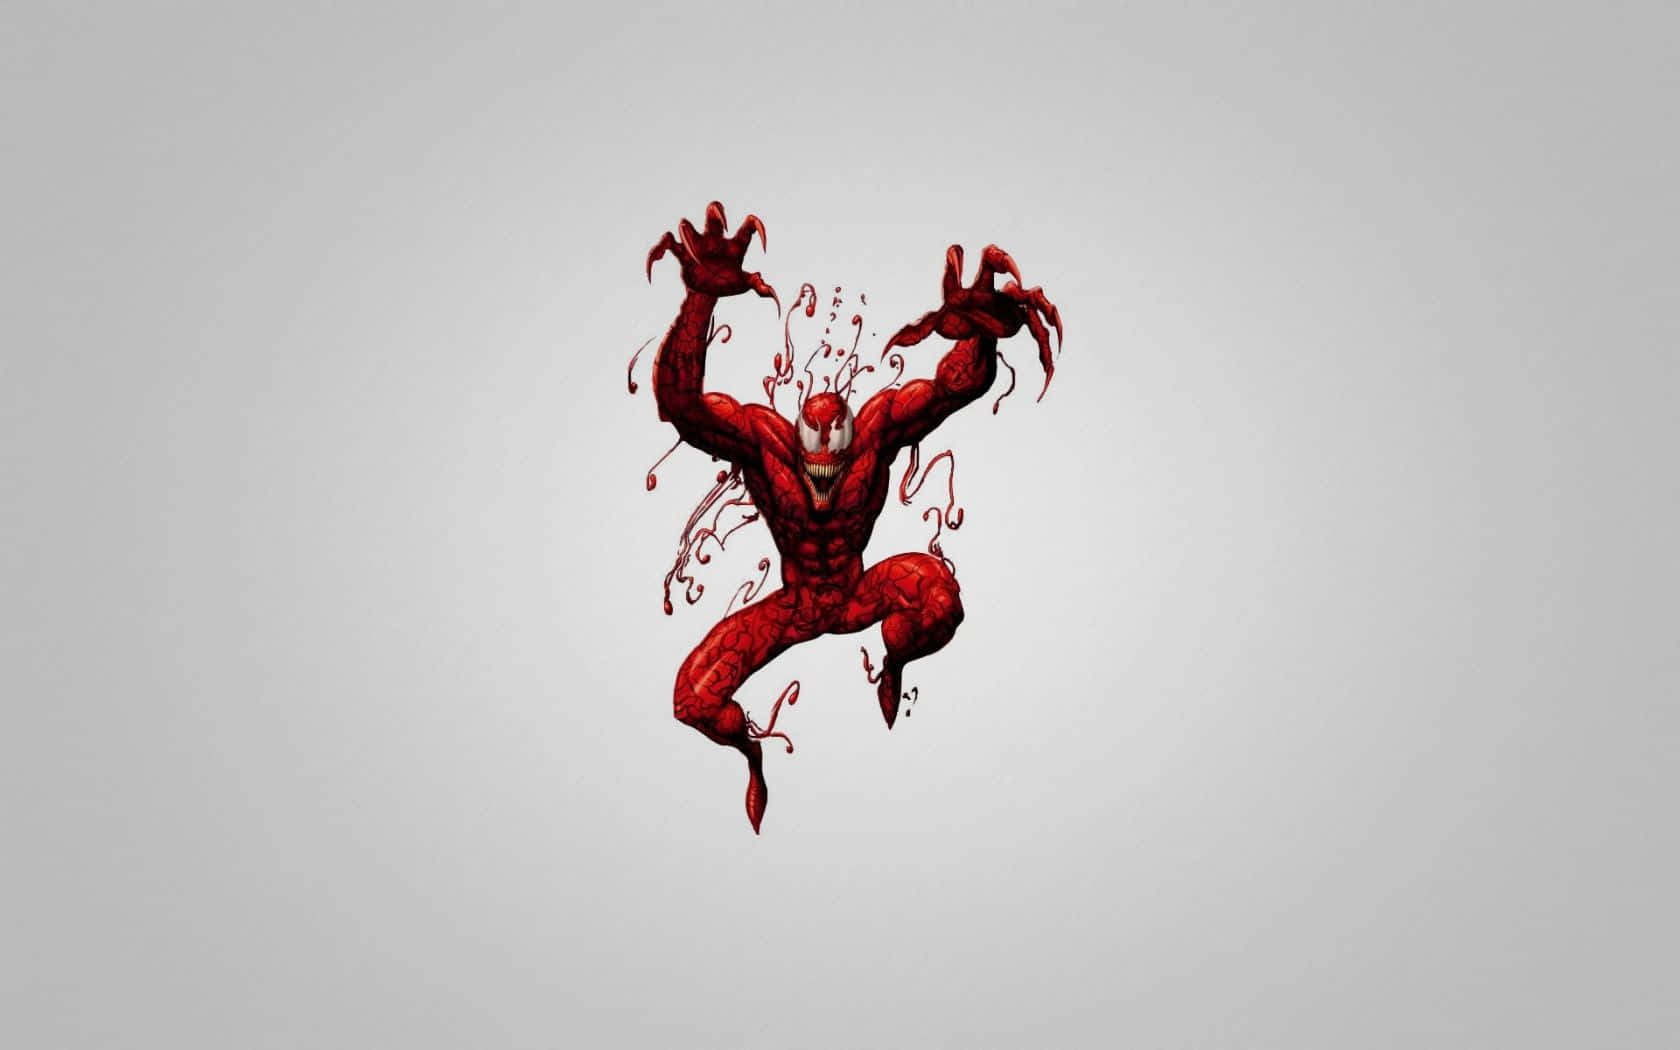 Carnage takes over the USA in 1680x1050 wallpaper Wallpaper